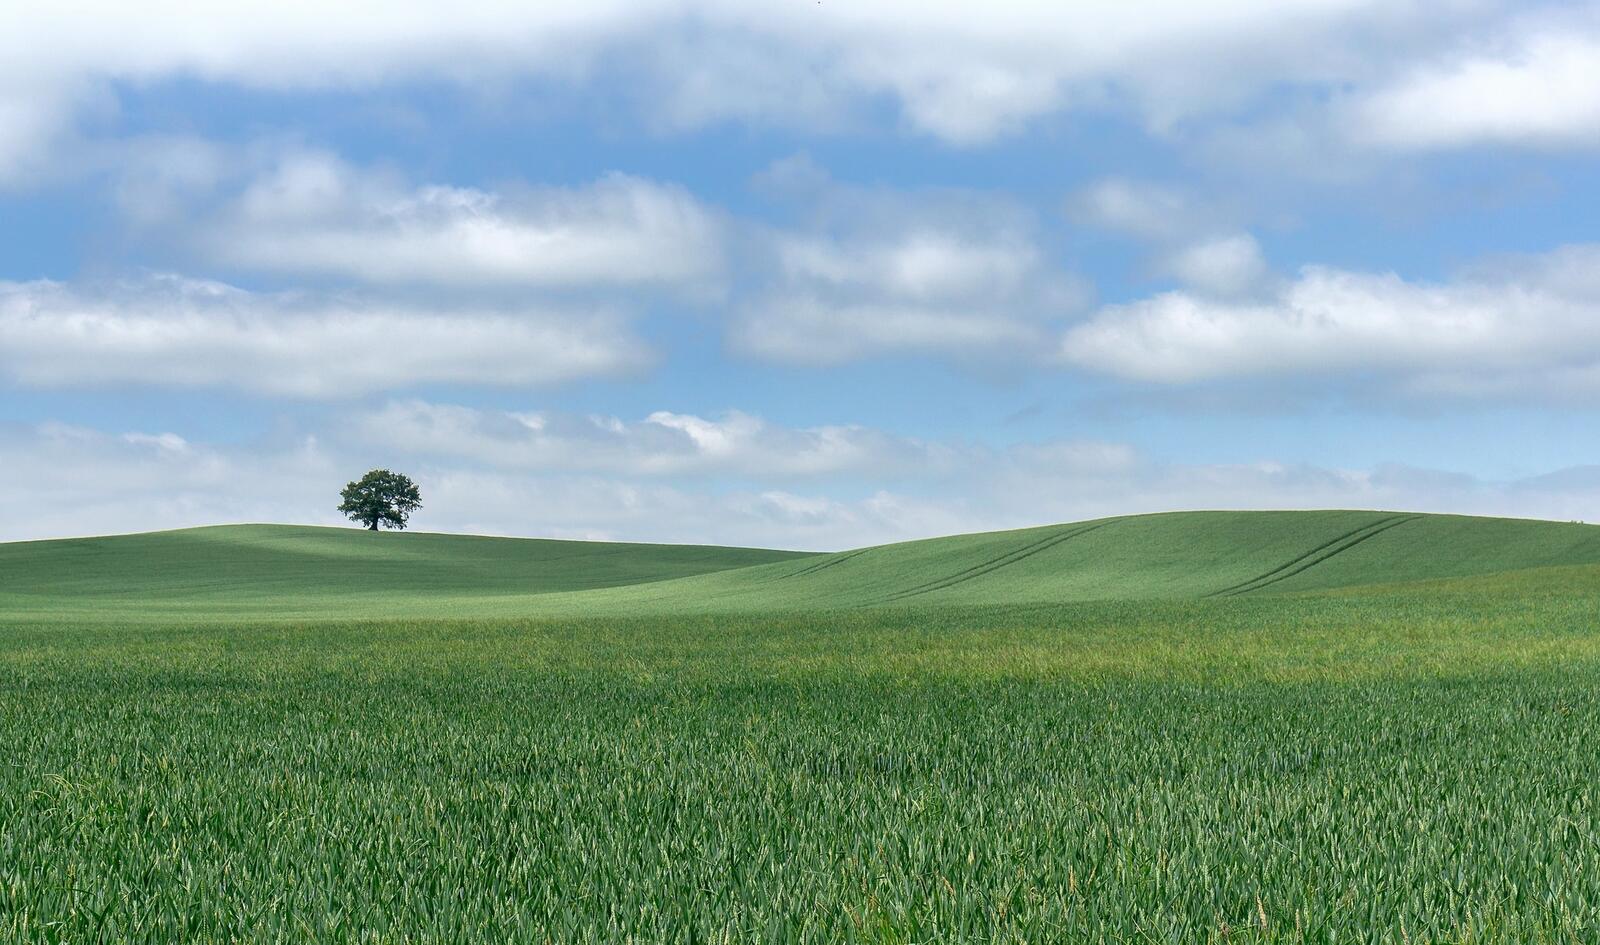 Free photo A lone tree on a green hilly field